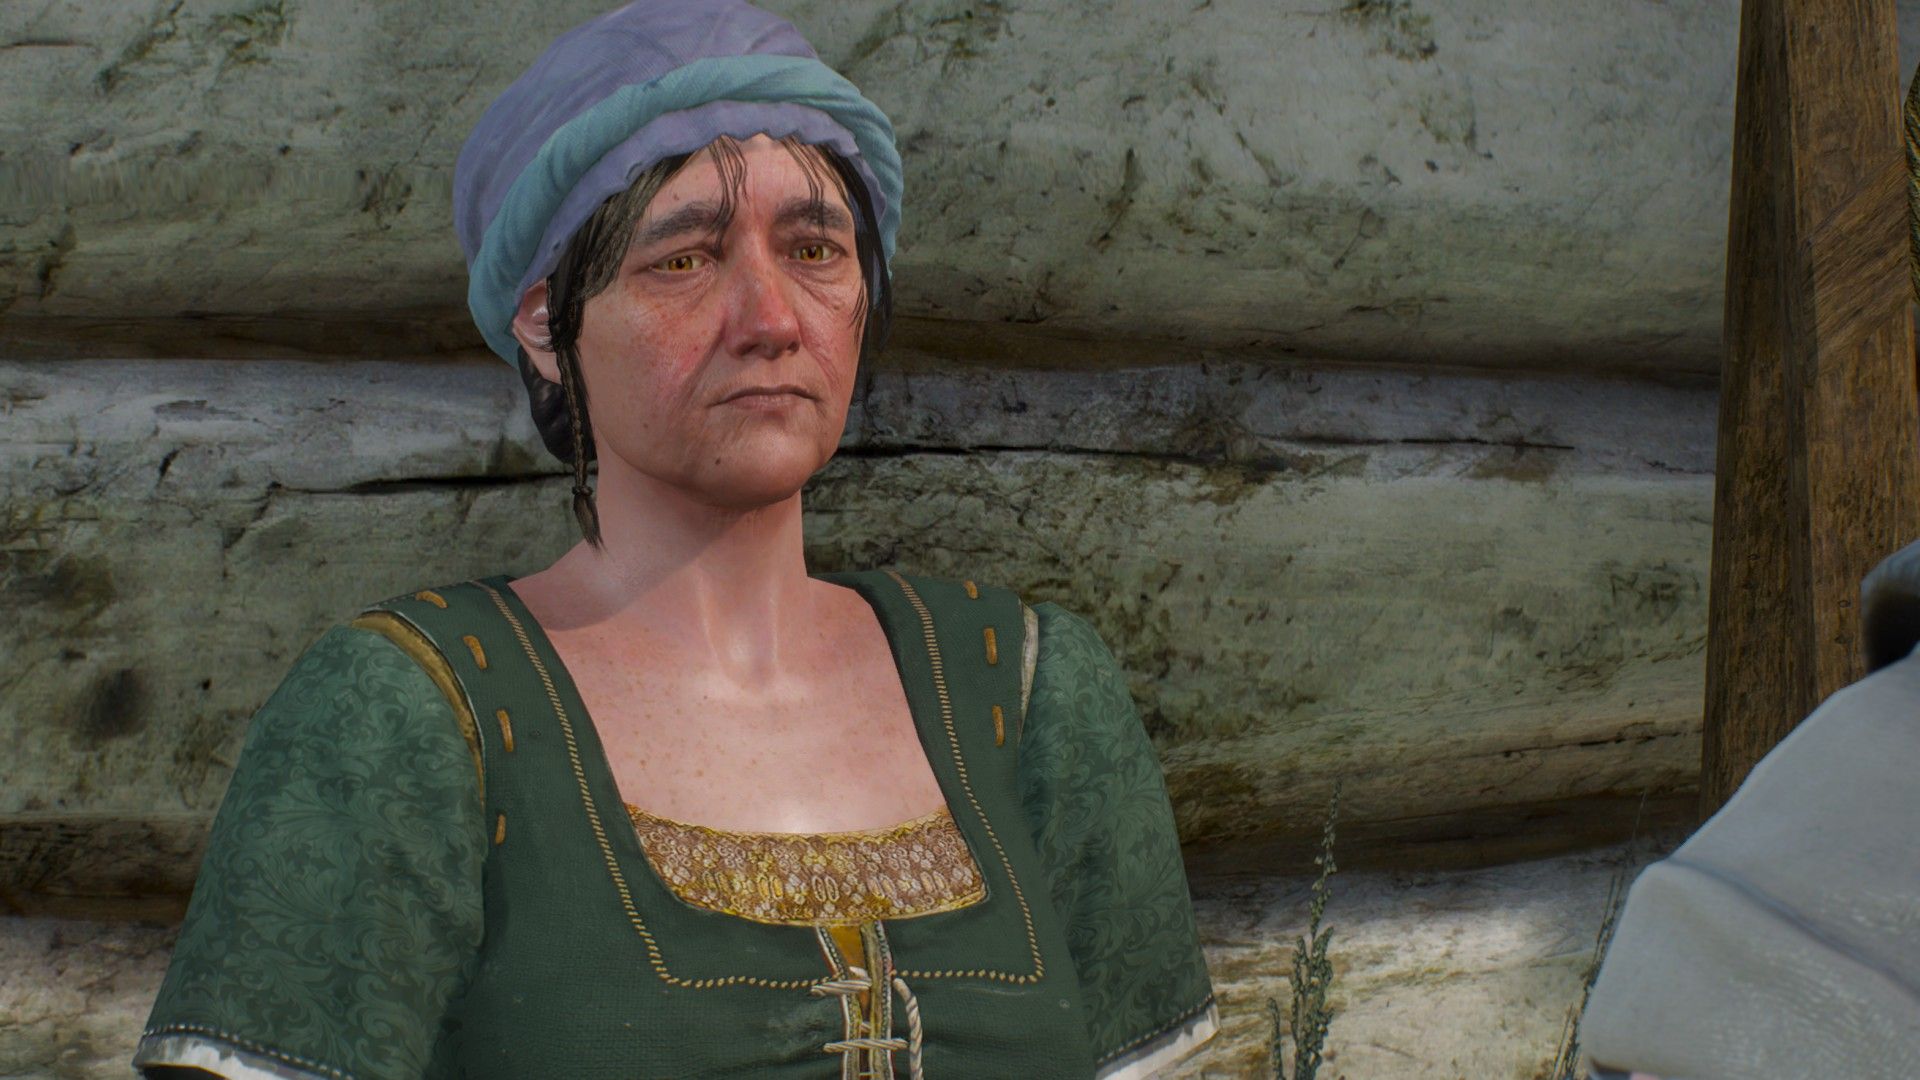 An old woman wearing a modest green dress talks to Geralt outside her house in Farcorners.